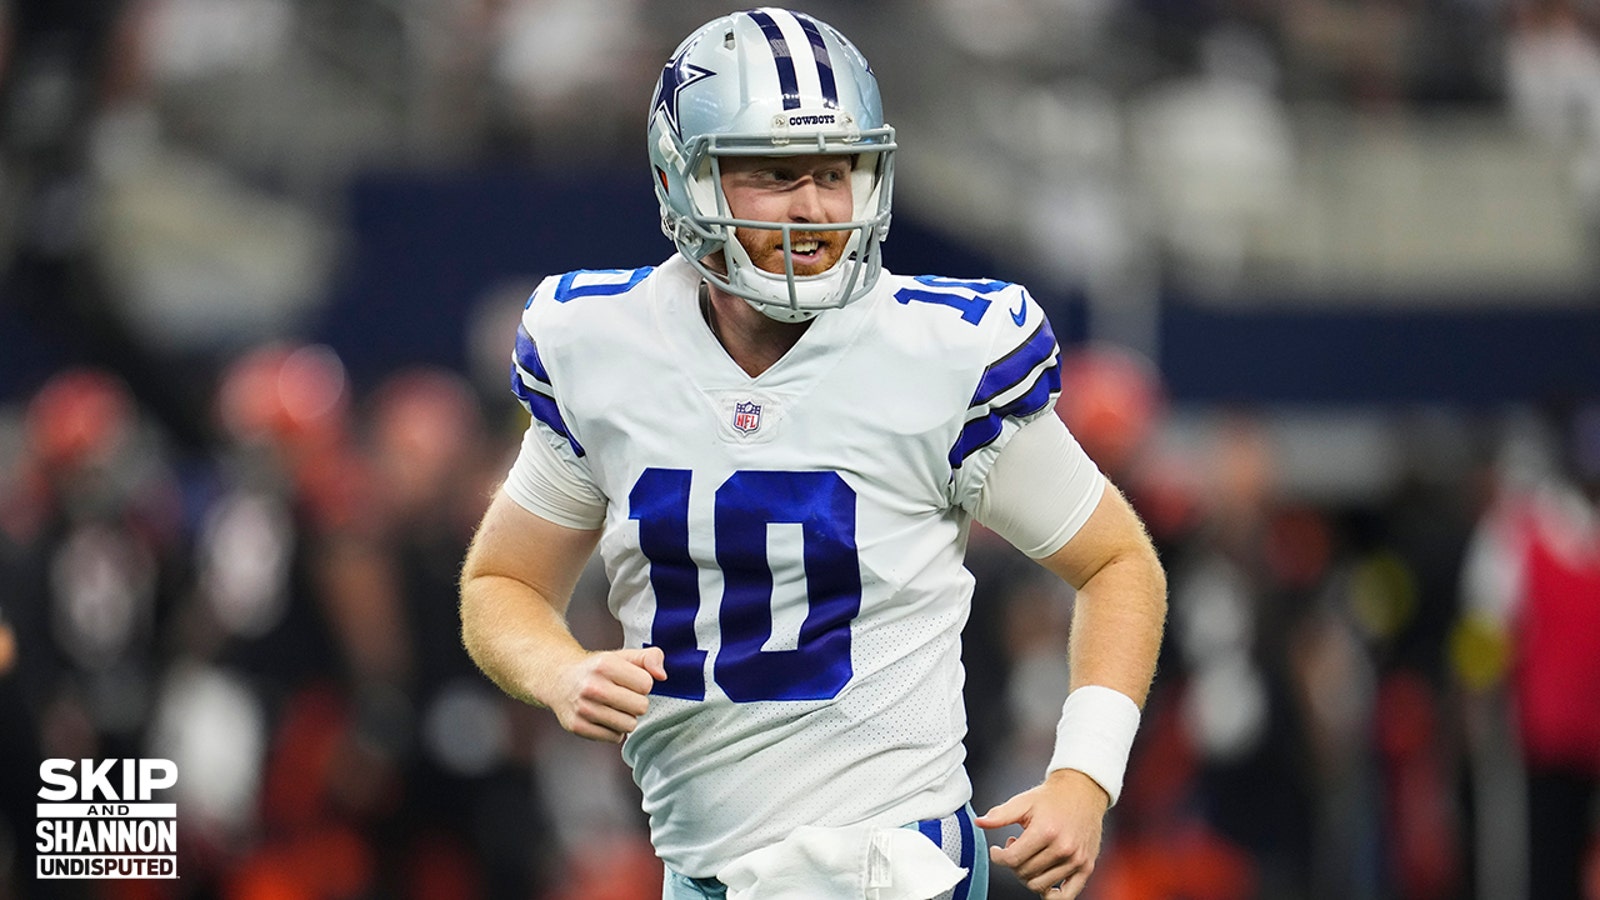 Cowboys move up to 10th in NFL's latest power rankings